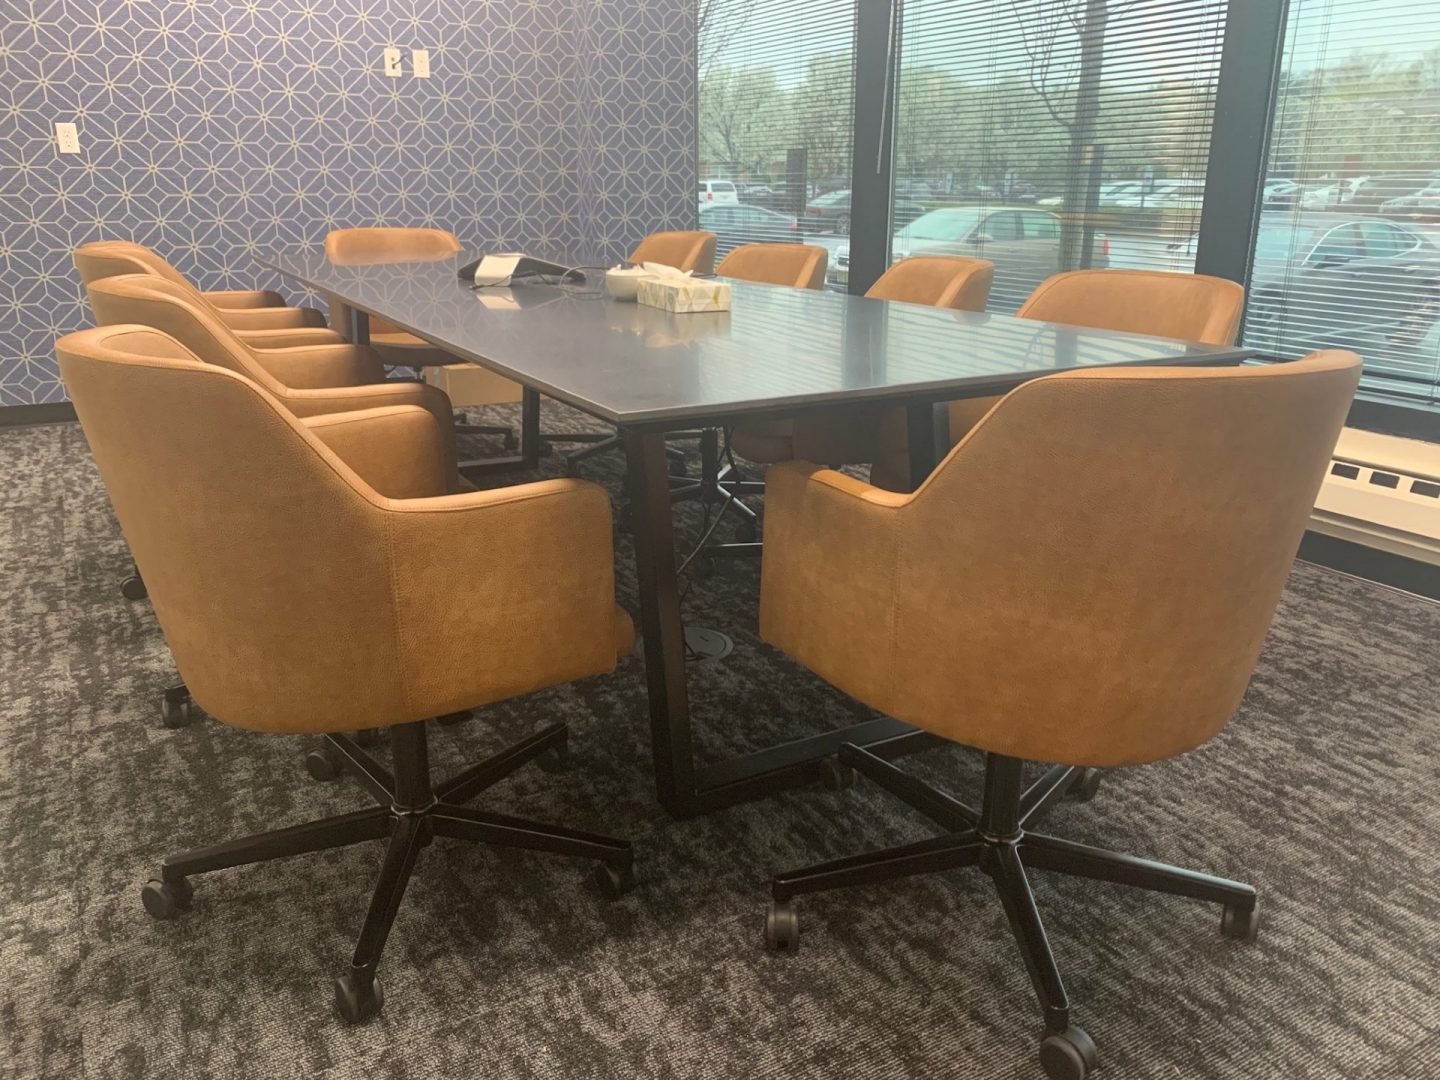 A black table with orange chairs